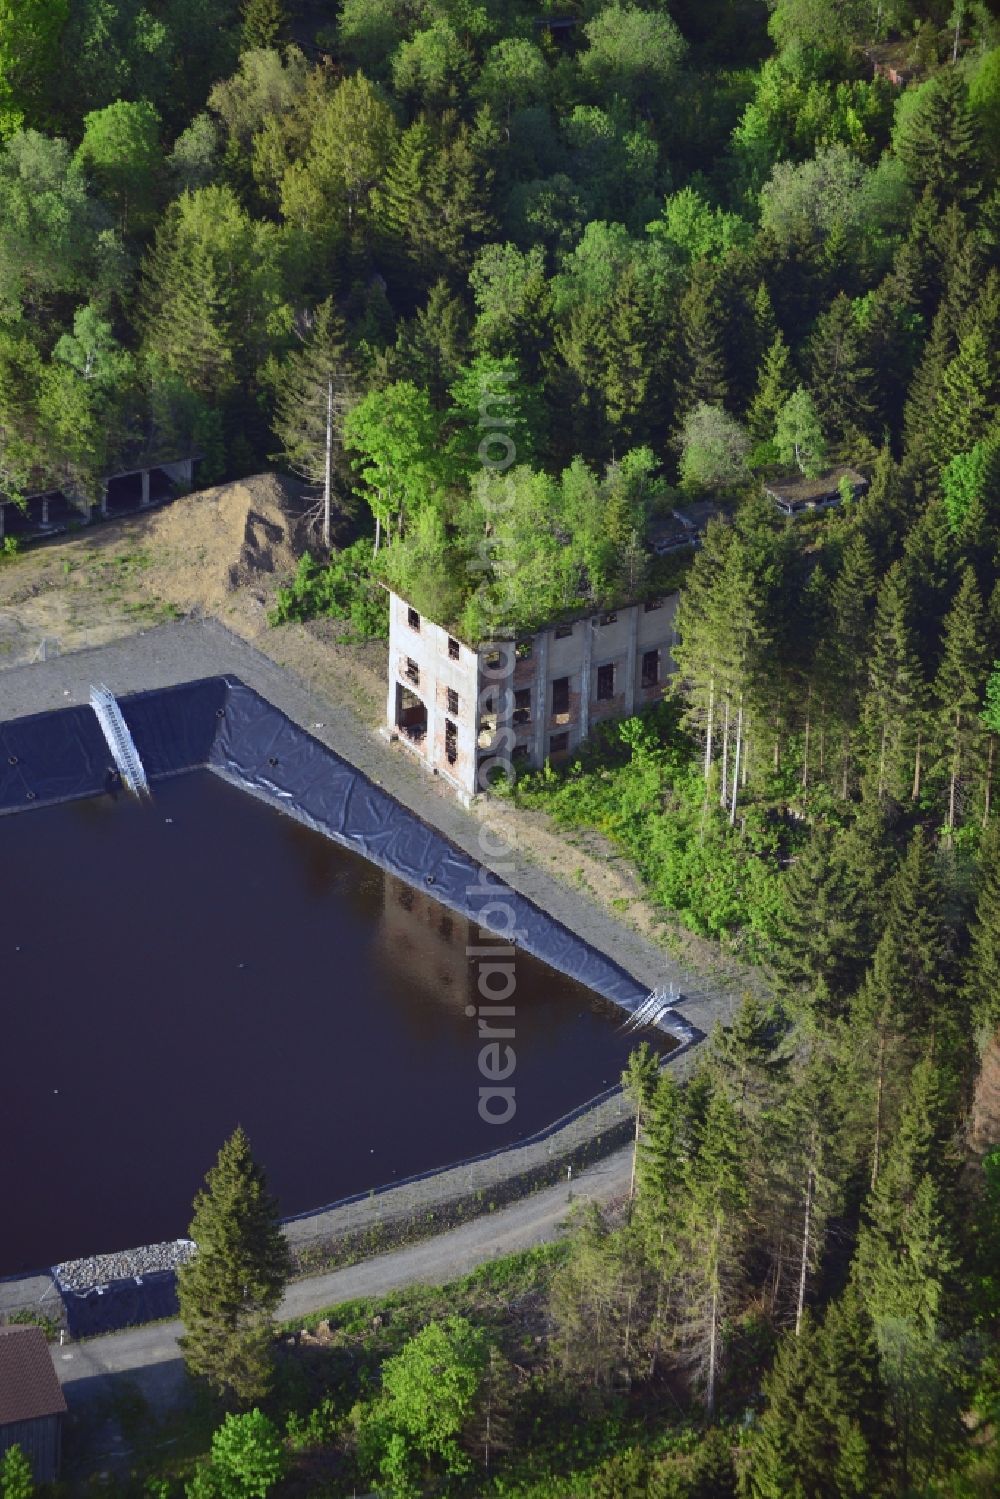 Aerial image Clausthal-Zellerfeld - Ruins of the former explosives and bomb factory in Clausthal-Zellerfeld in the state of Lower Saxony